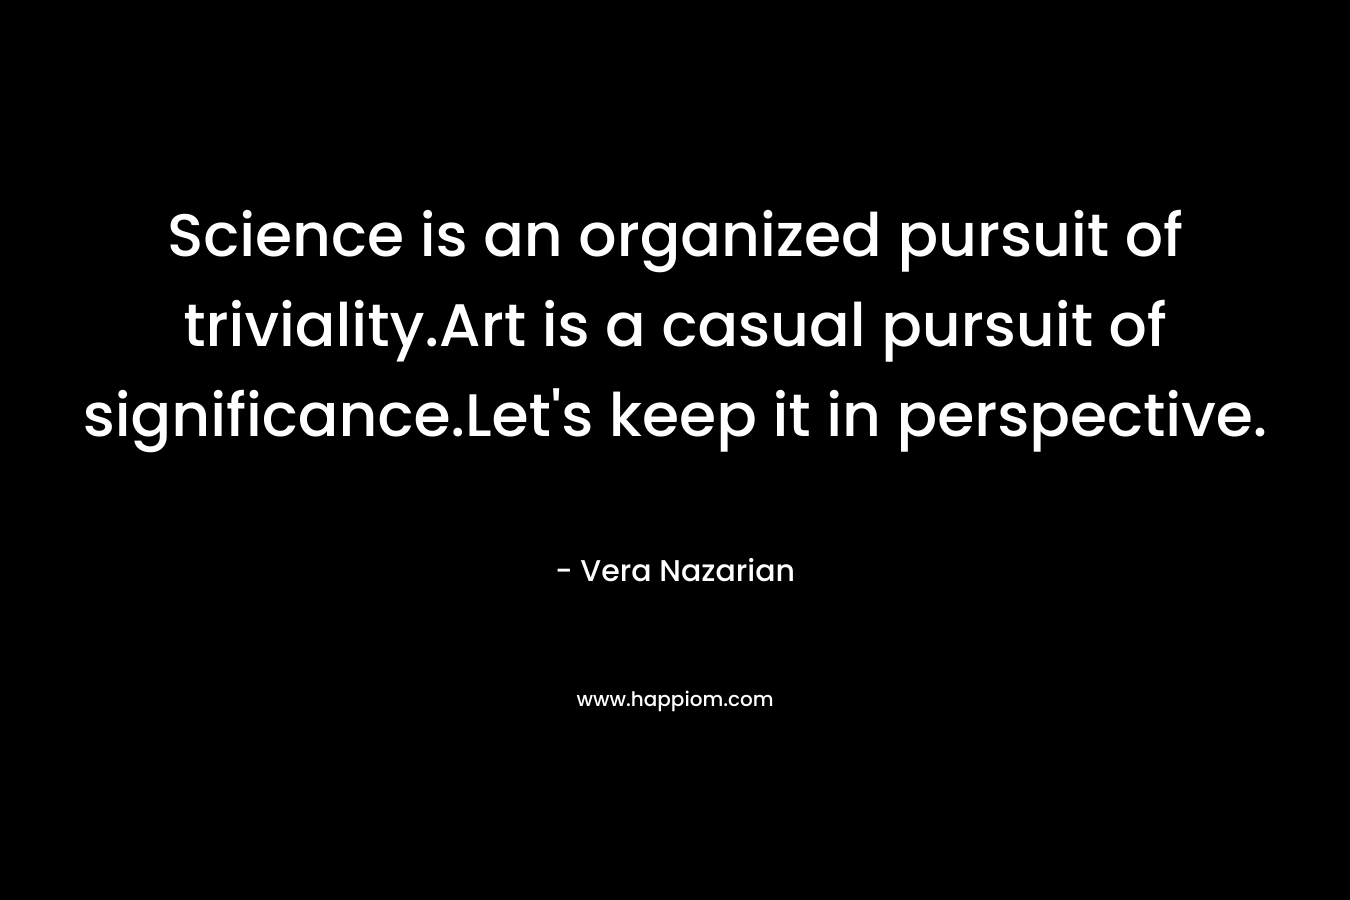 Science is an organized pursuit of triviality.Art is a casual pursuit of significance.Let’s keep it in perspective. – Vera Nazarian